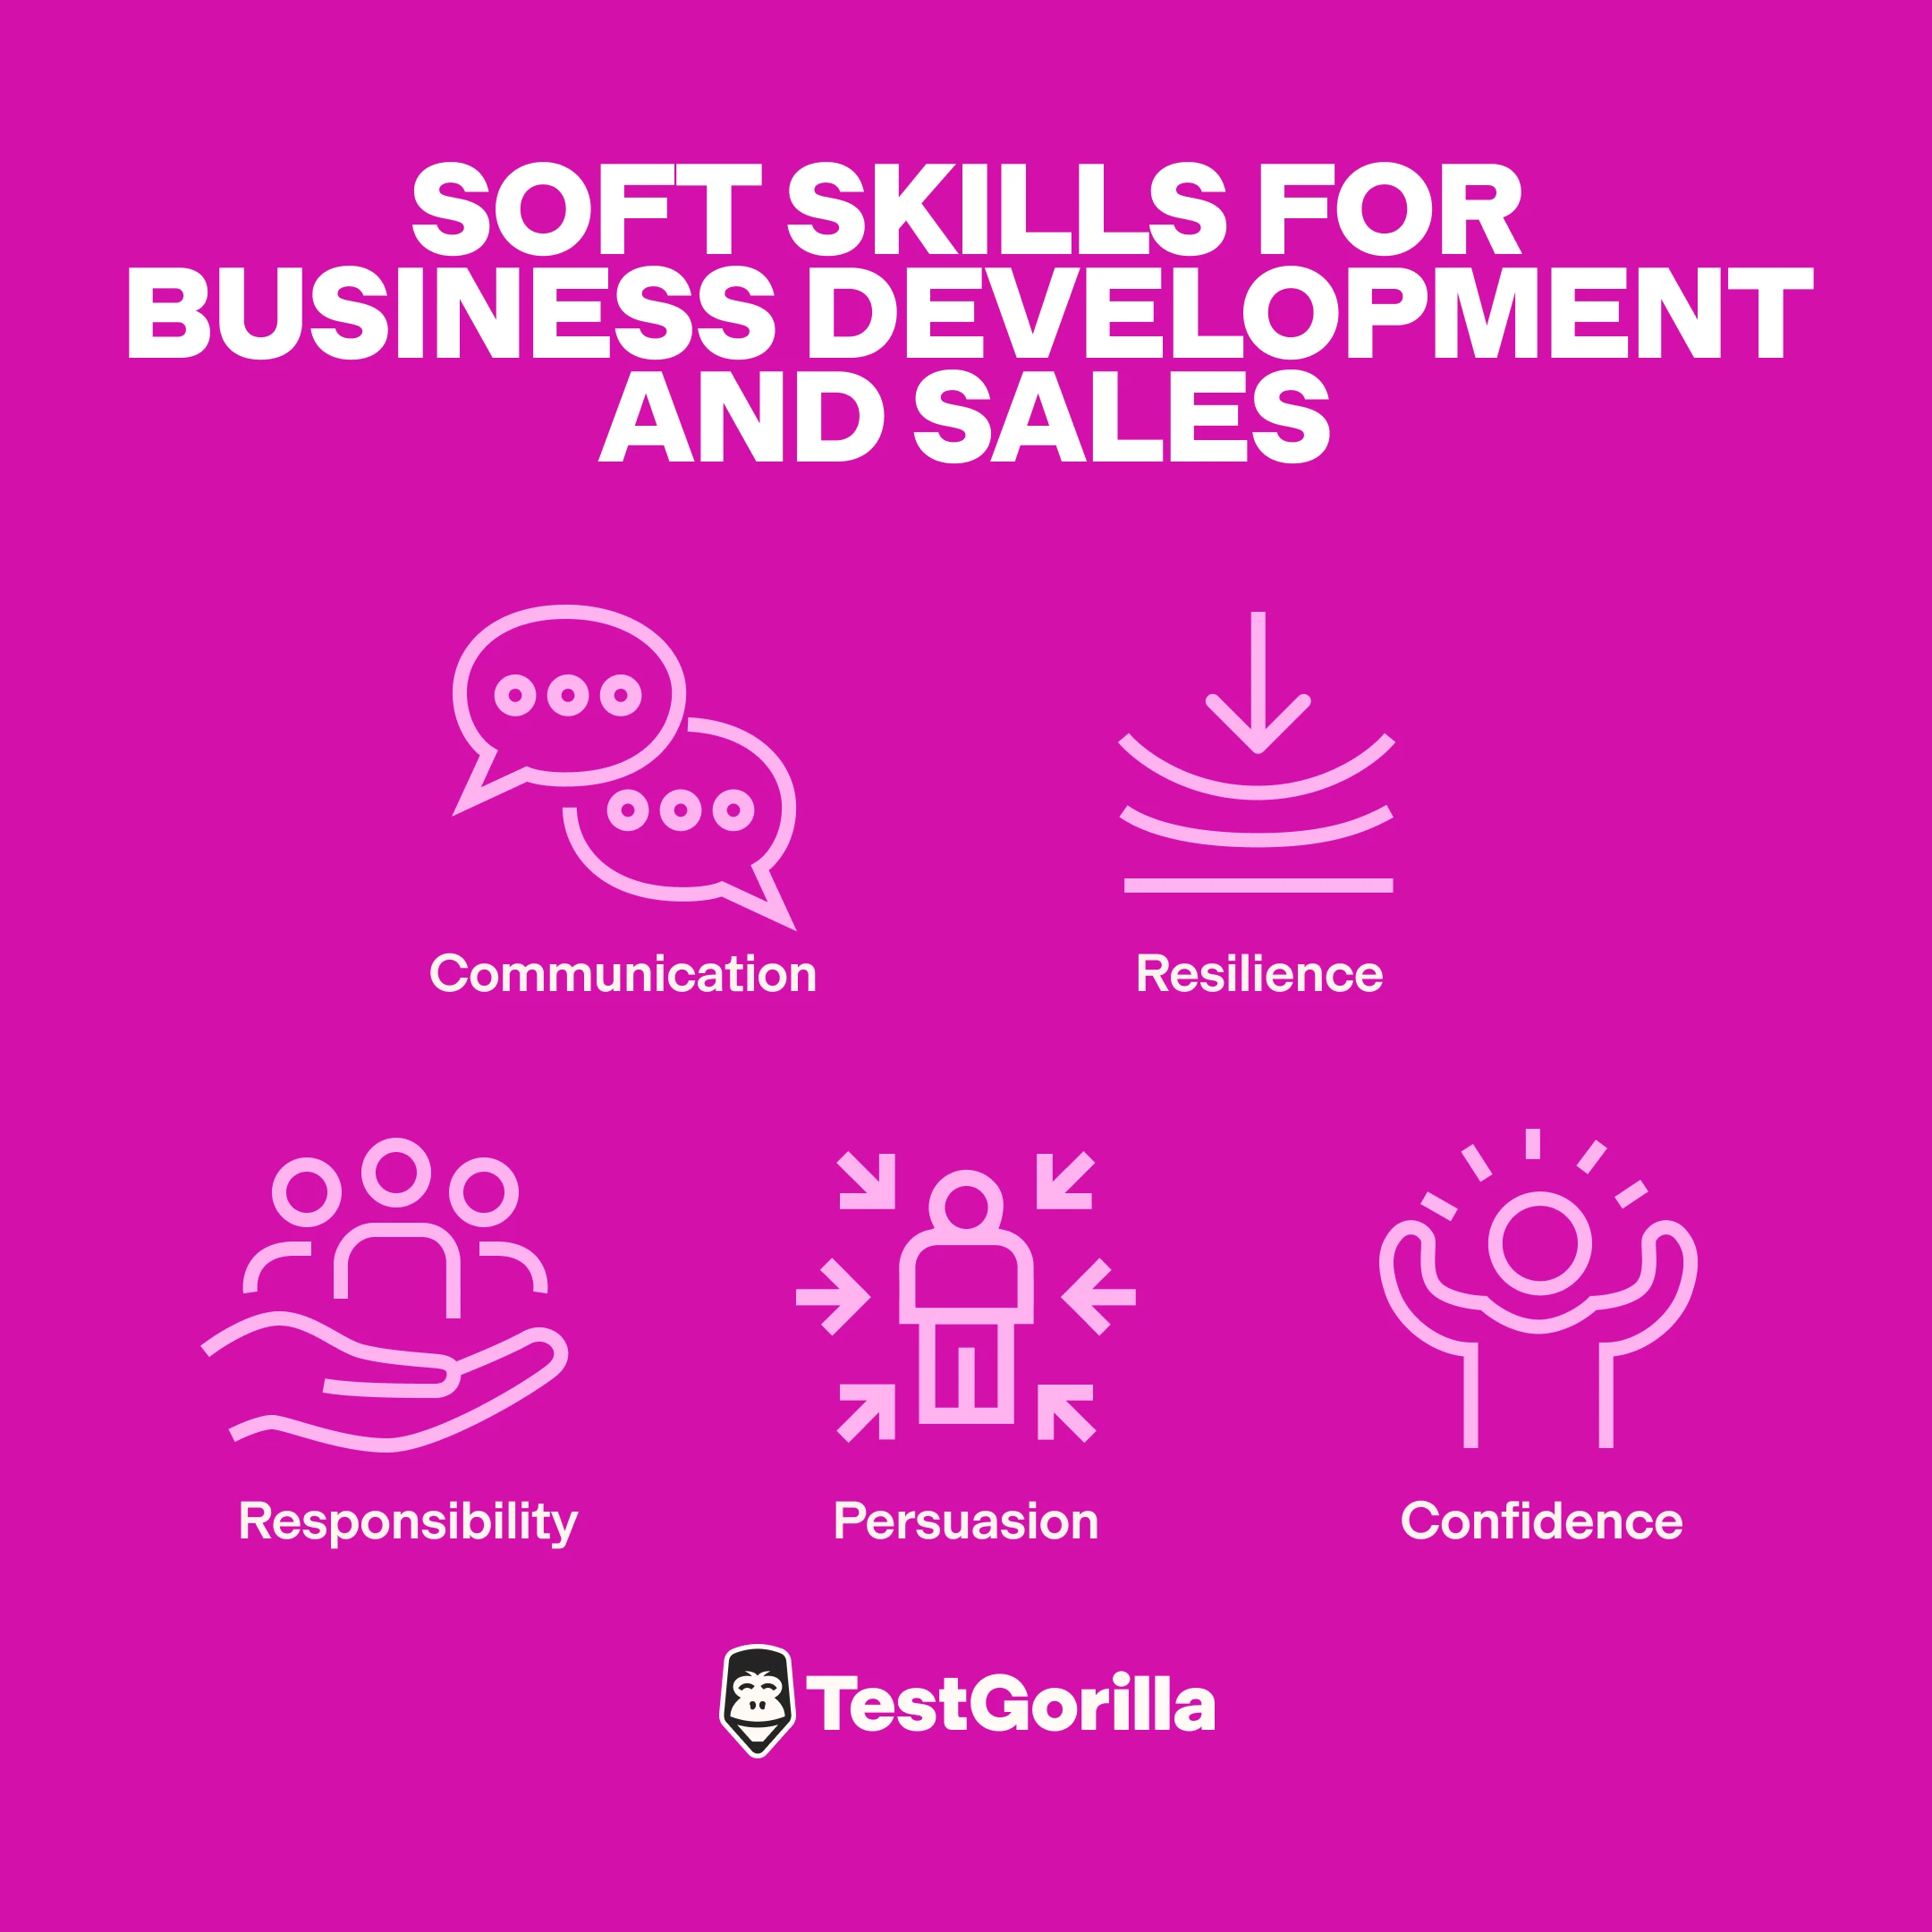 Soft skills for business development and sales graphic